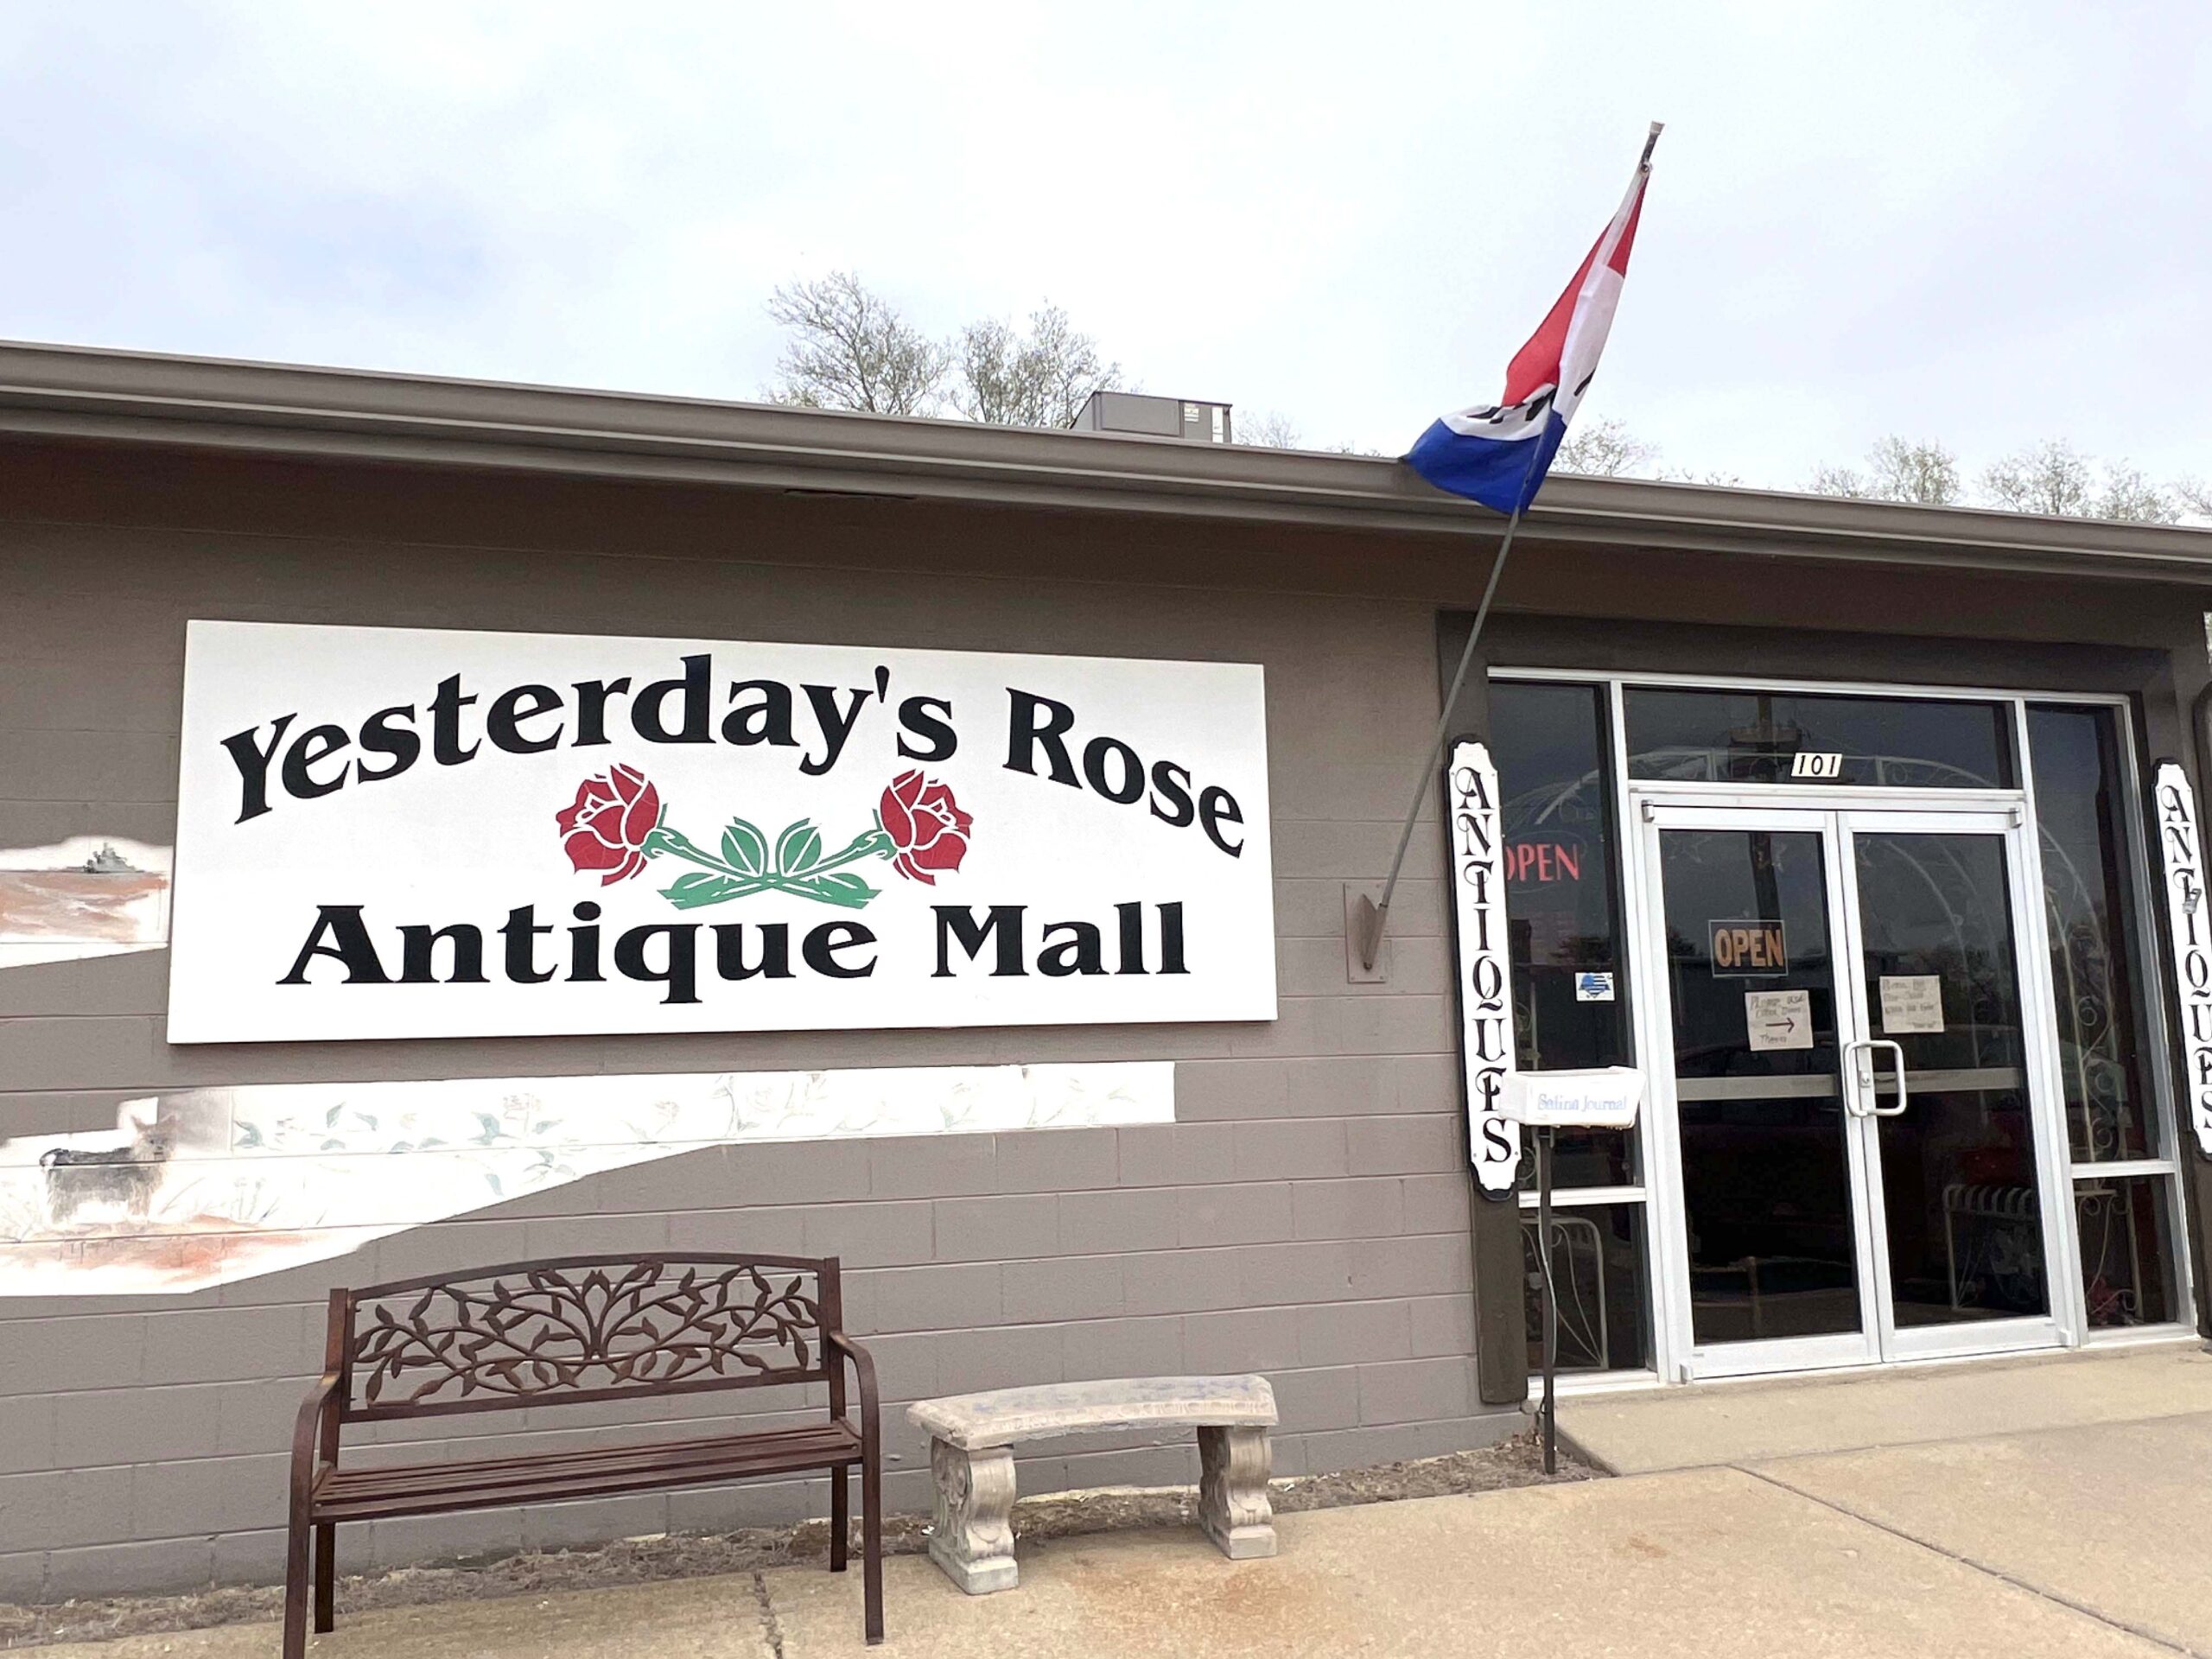 Yesterday's Rose Antique Mall